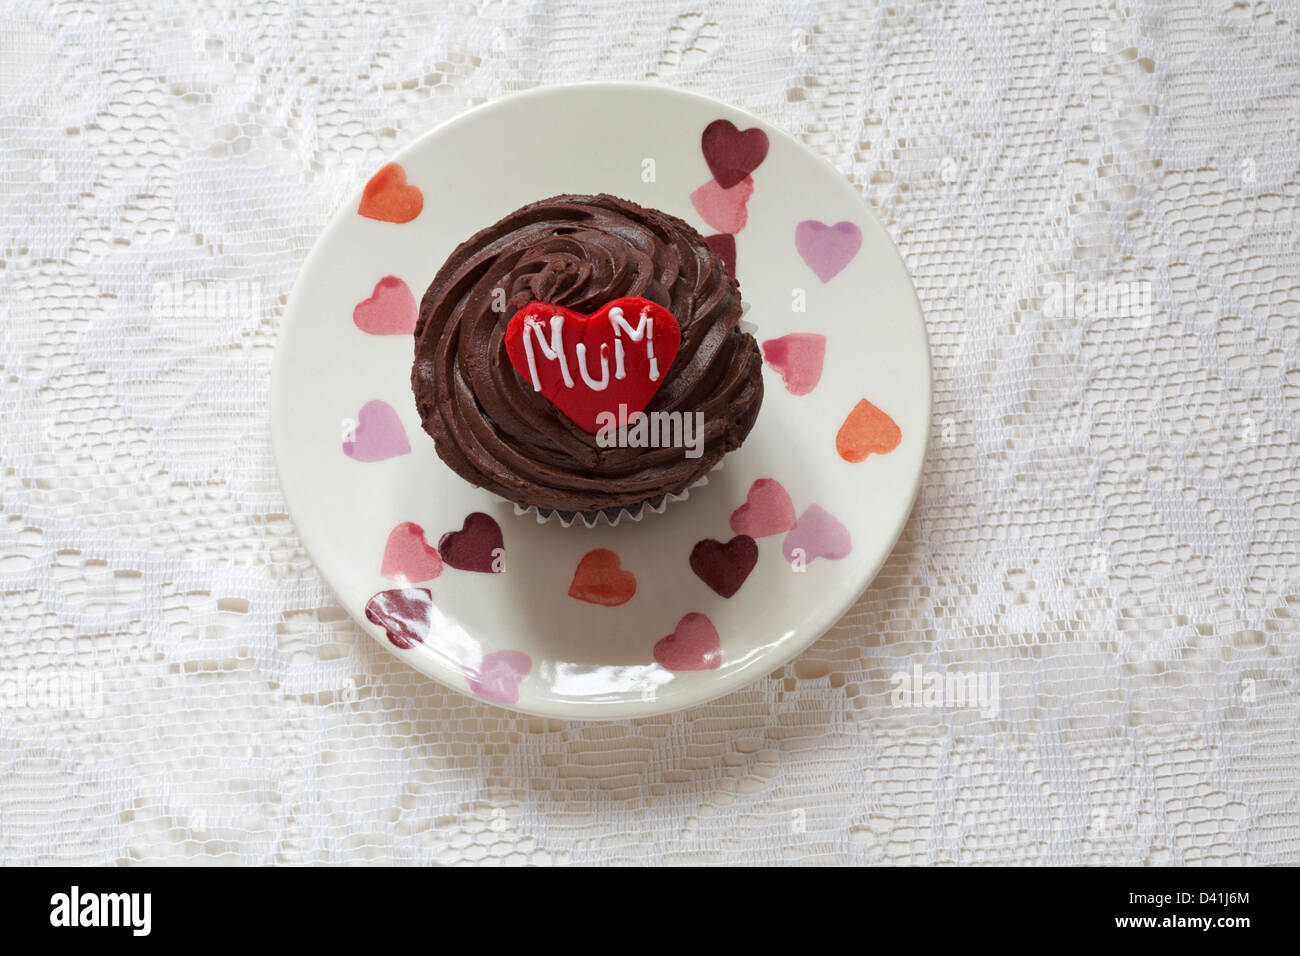 chocolate cupcake with the word mum iced on red heart for Mothering Sunday, Mothers Day set on plate with hearts on Stock Photo